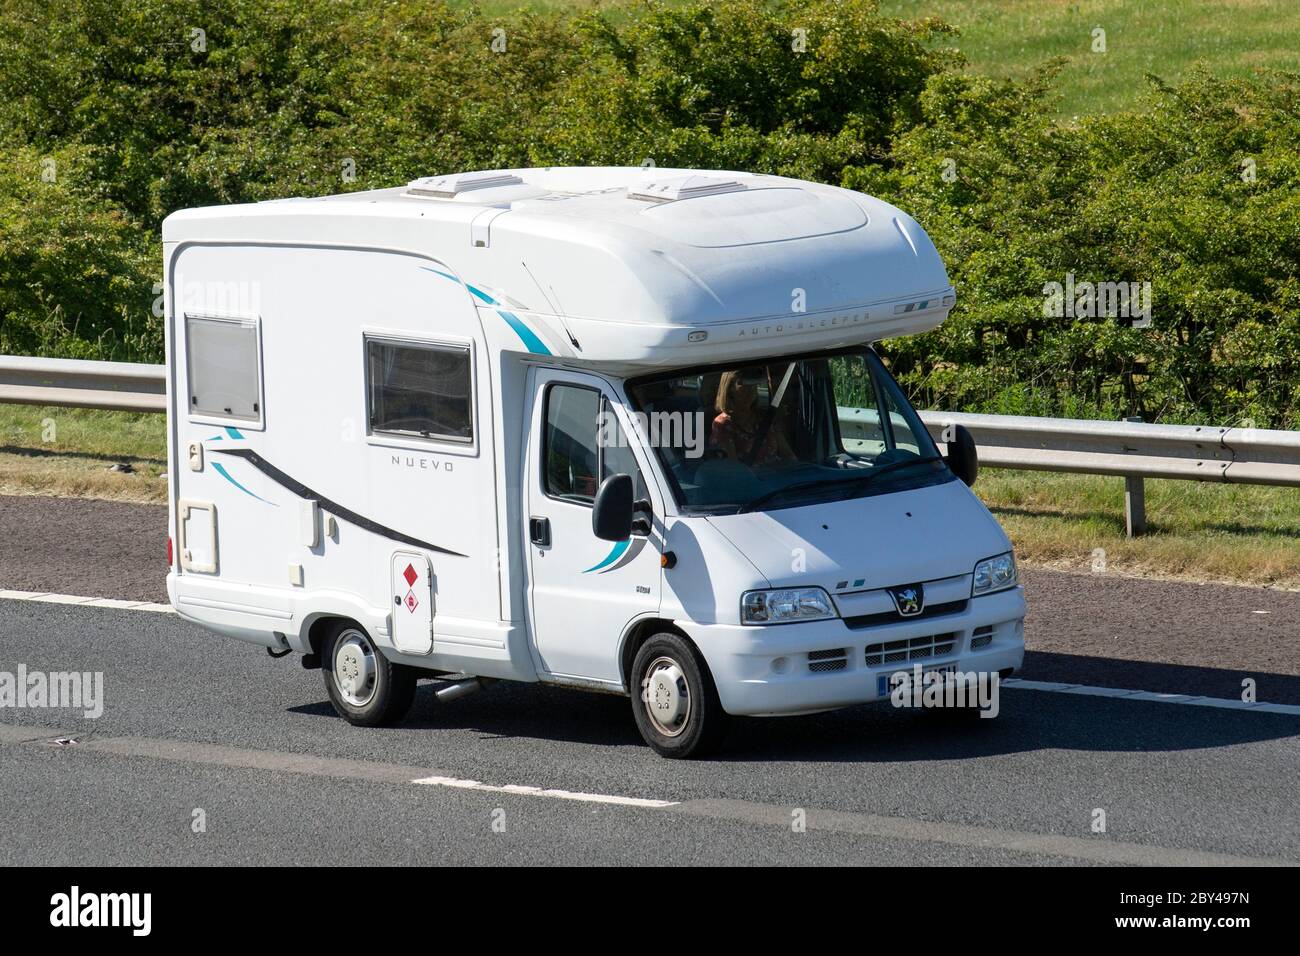 2004 white Peugeot Boxer 330 LX SWB HDI; Touring Caravans and Motorhomes, campervans, Nuevo RV leisure vehicle, family holidays, caravanette vacations, caravan holiday, life on the road, Stock Photo